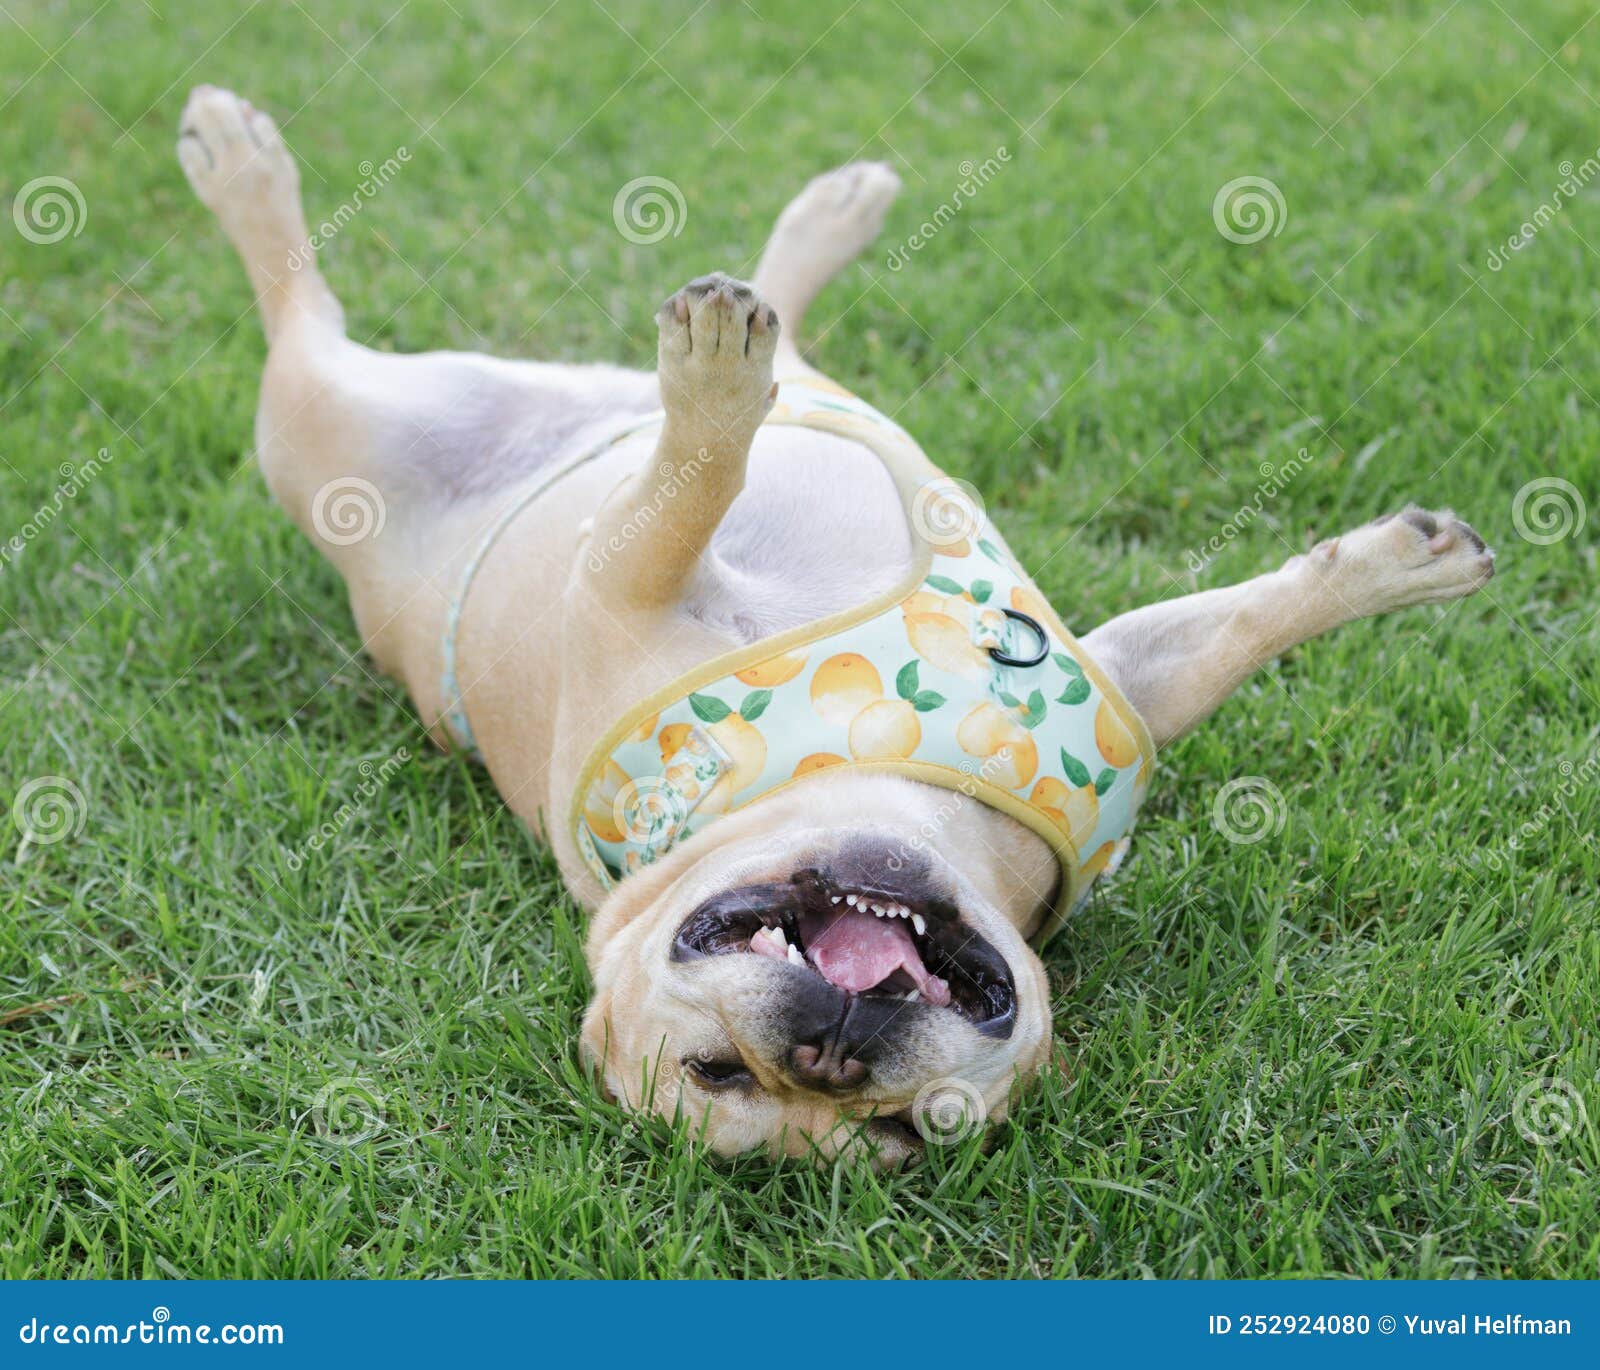 6-year-old french bulldog male rolling over and goofing off